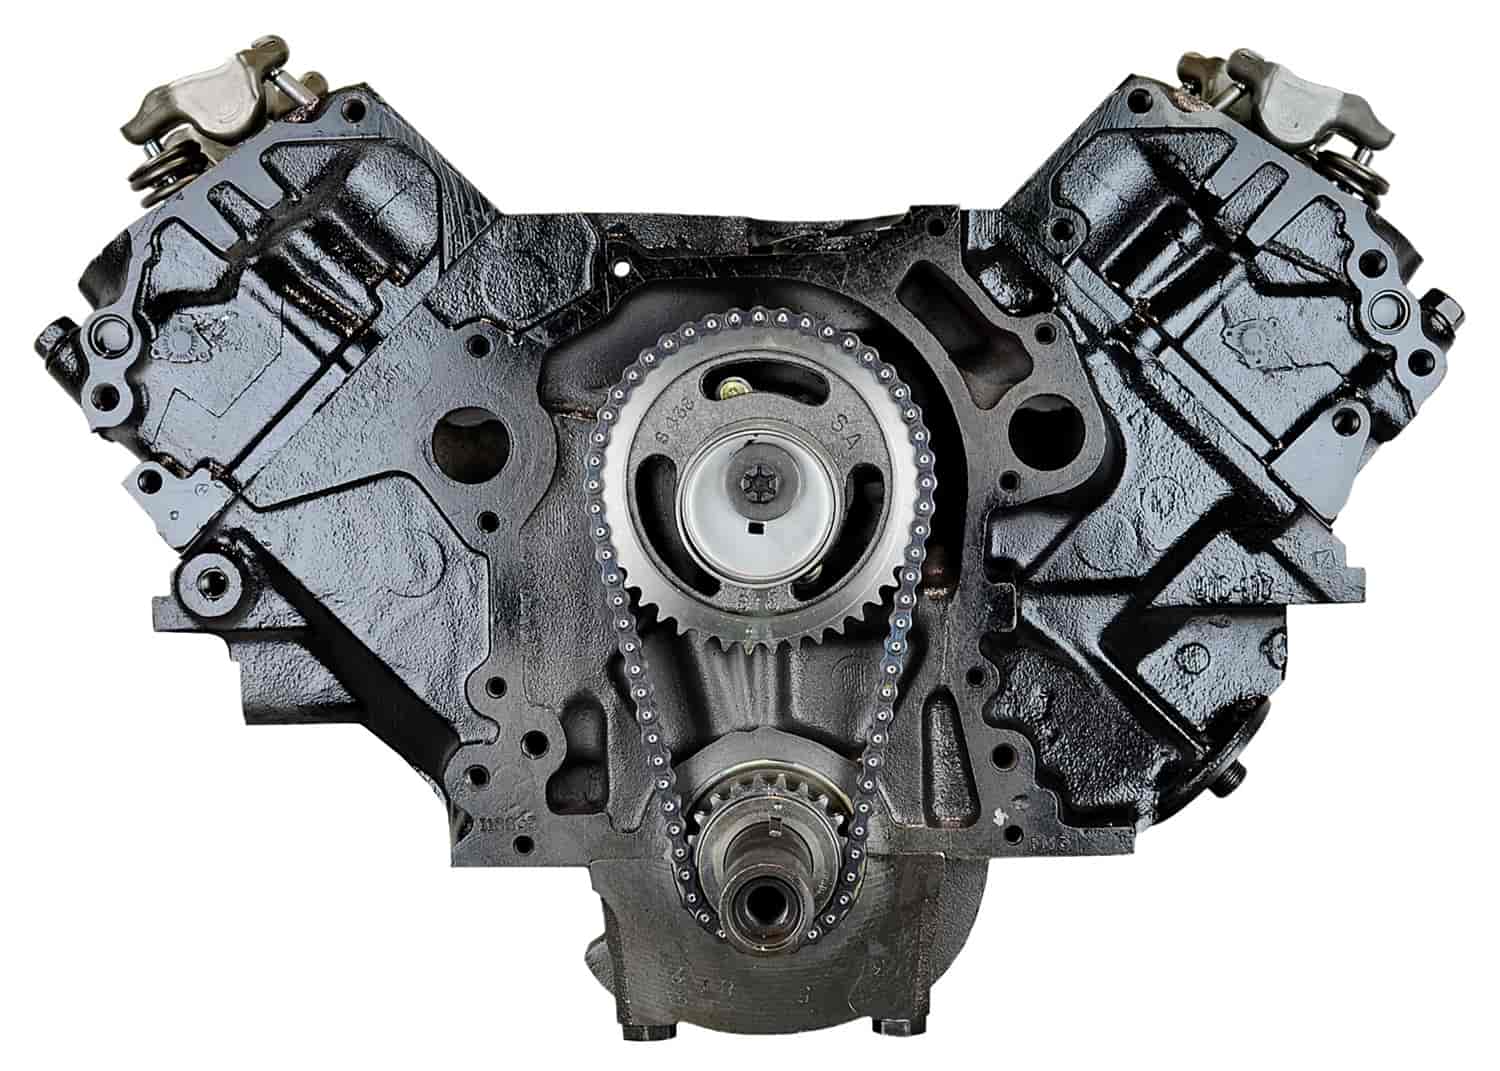 Remanufactured Crate Engine for Marine Applications with 1979-1990 Big Block Ford 460ci/7.5L